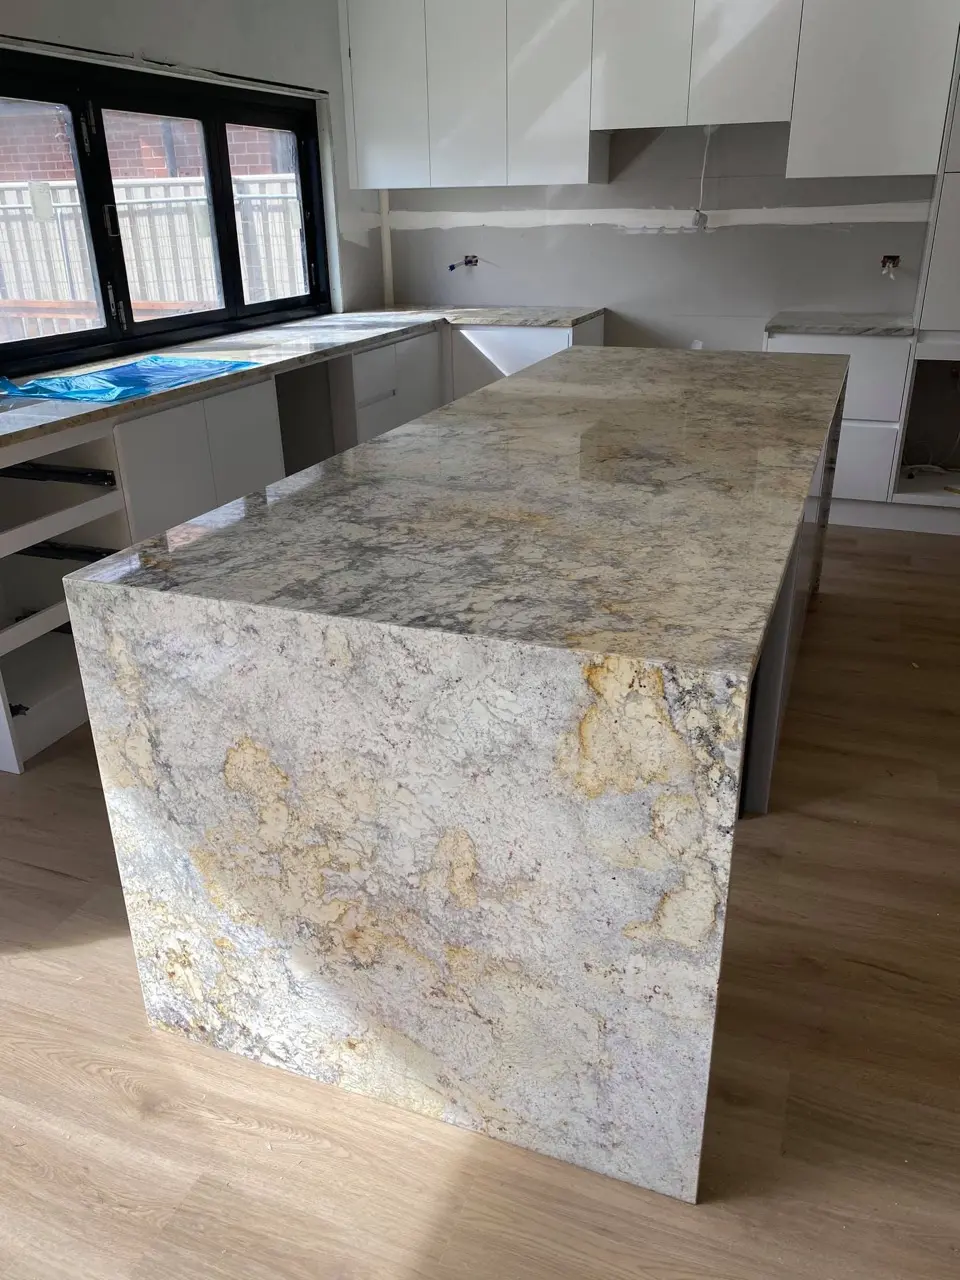 Image of a benchtop from a review left by a client for SA Marble and Granite.